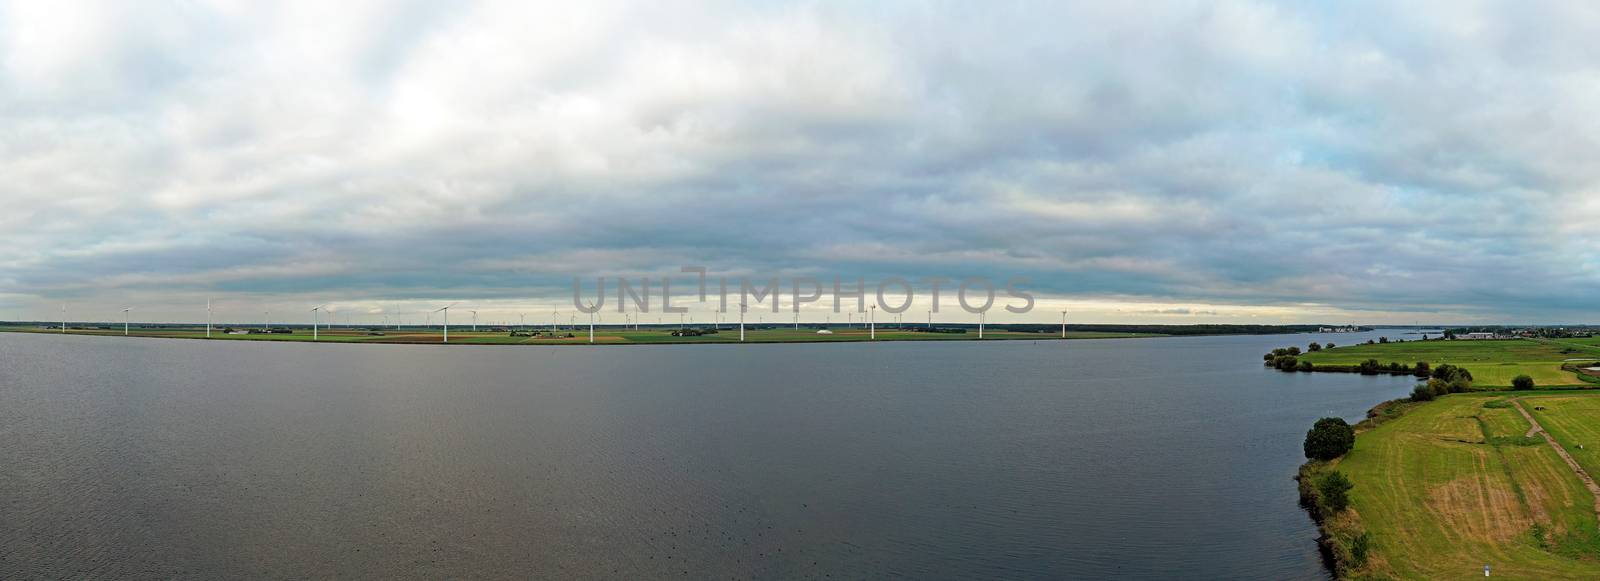 Aerial panorama from a wind farm at the Eenmeer in the Netherlan by devy